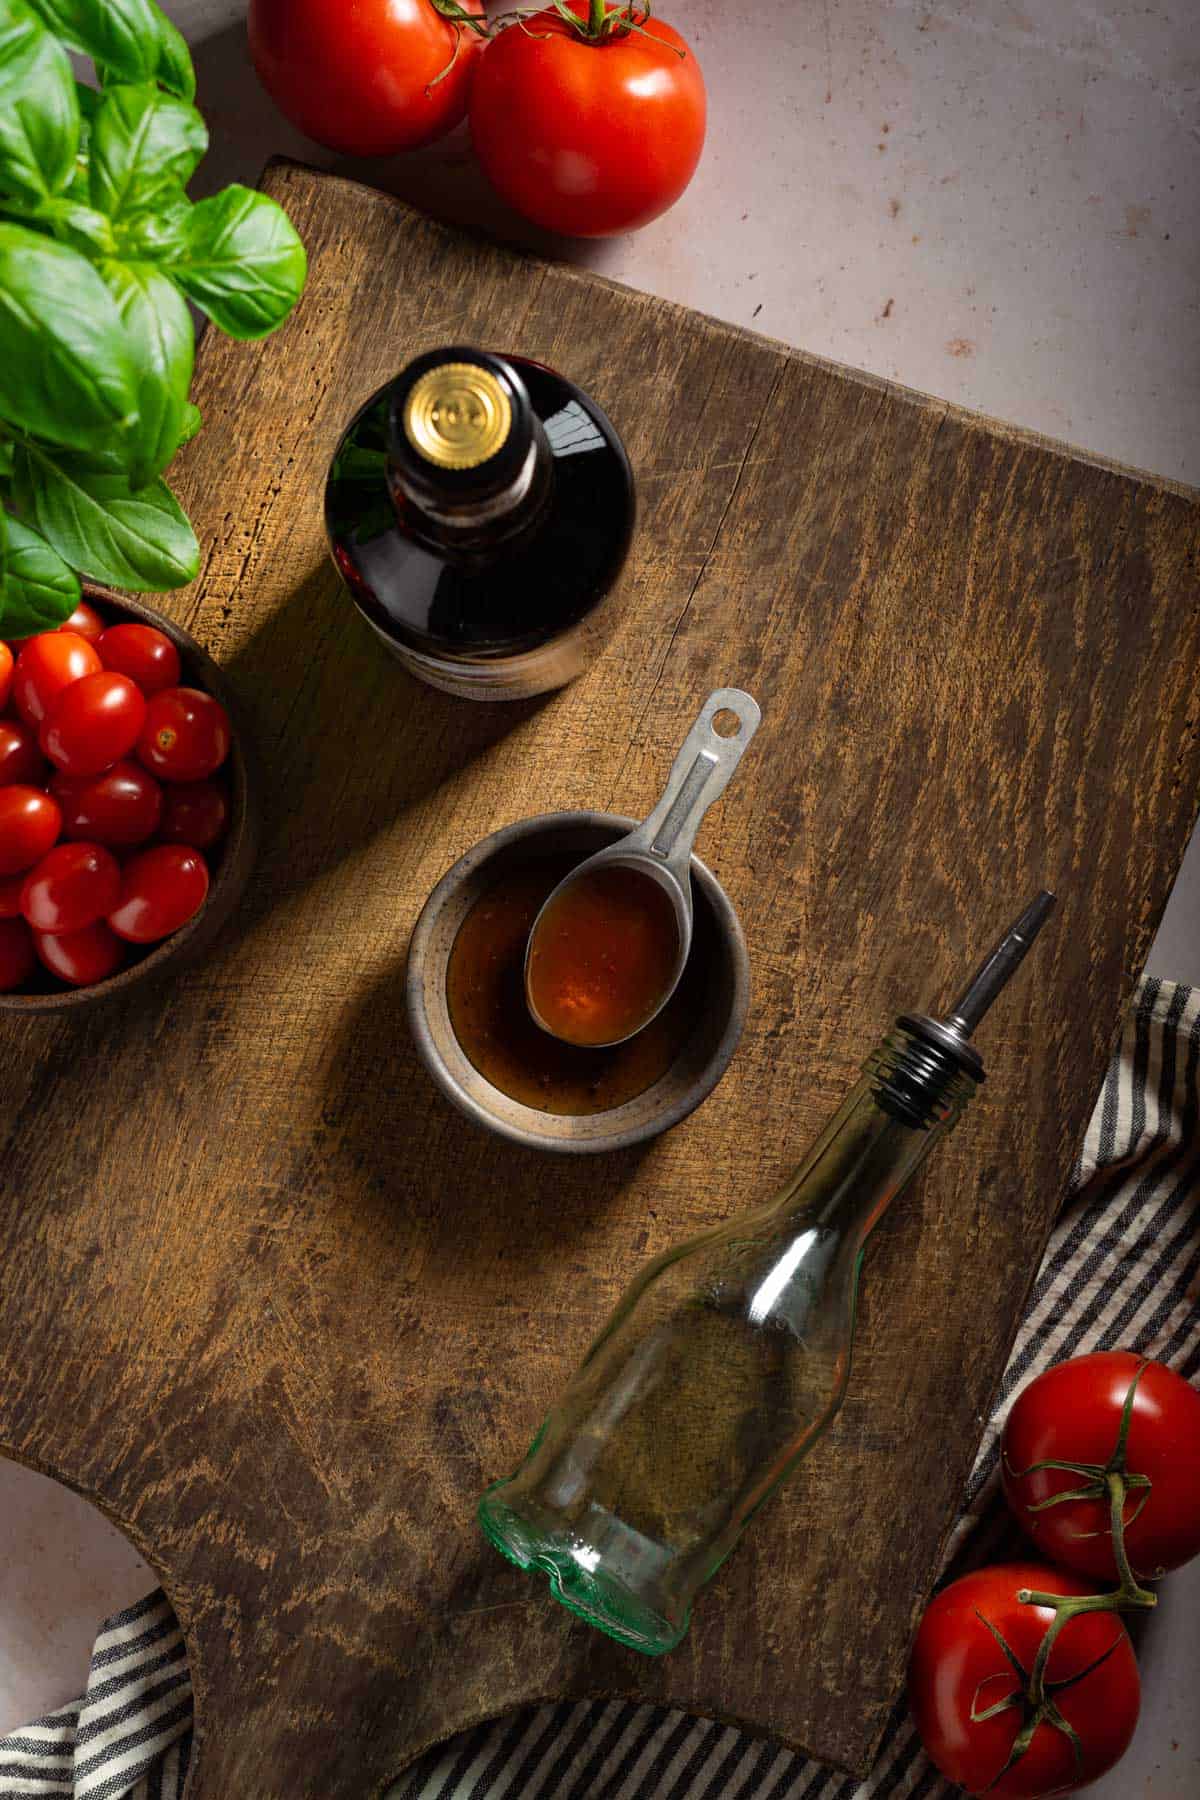 A cutting board with a bottle of balsamic vinegar and honey next to tomatoes and basil.